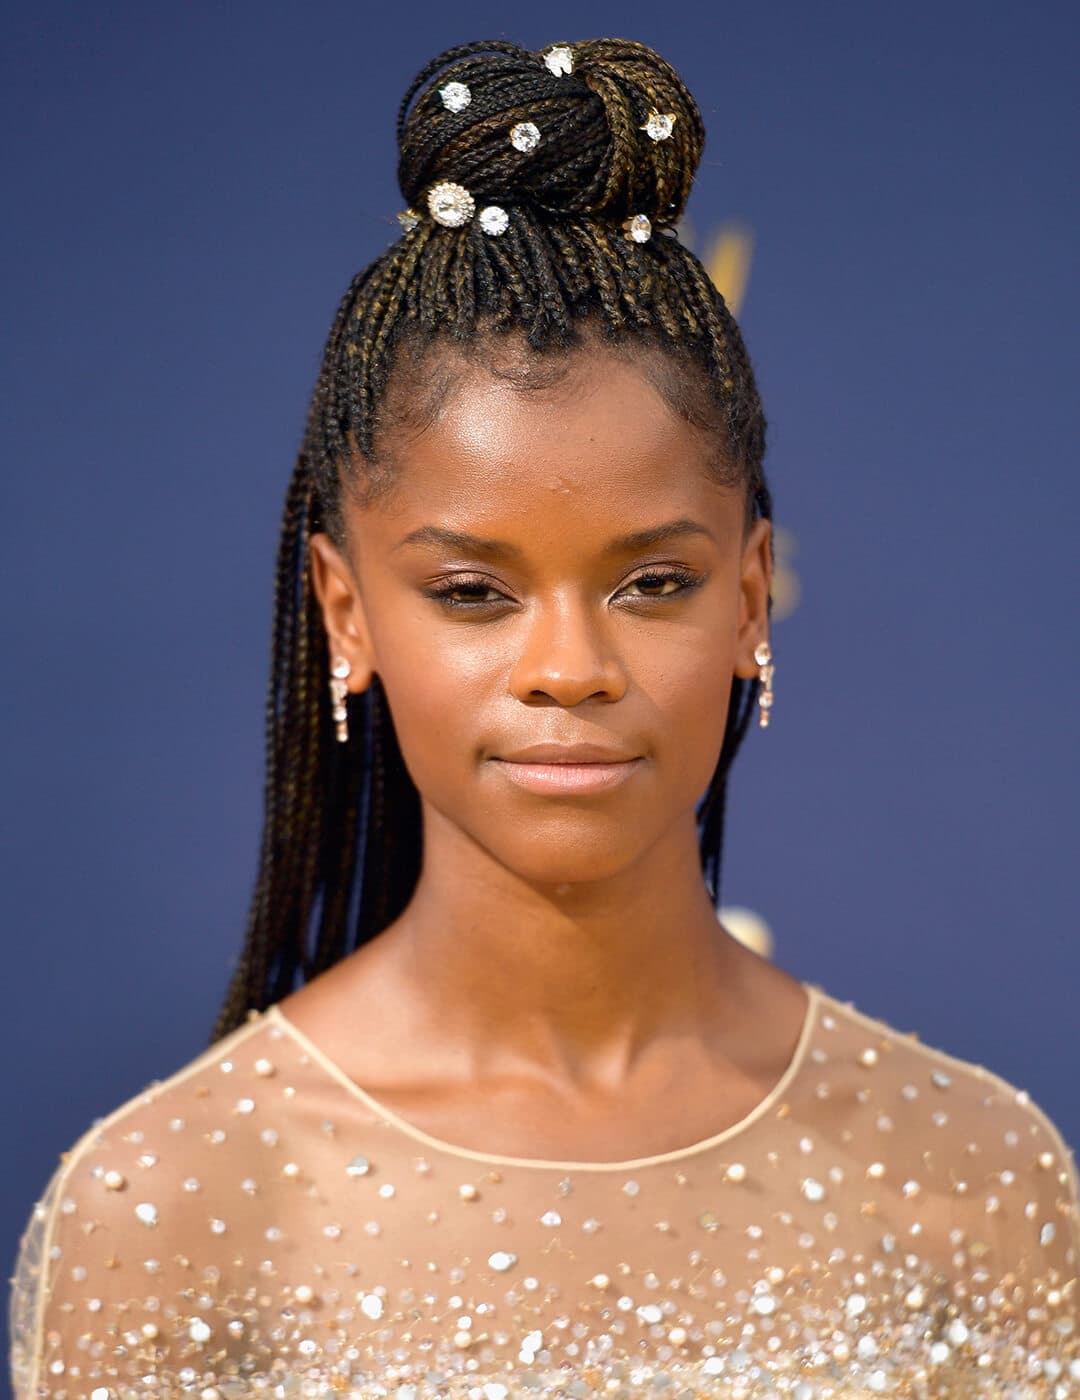 Letitia Wright rocking a braided hairstyle embellished with crystals and sheer nude dress with crystals